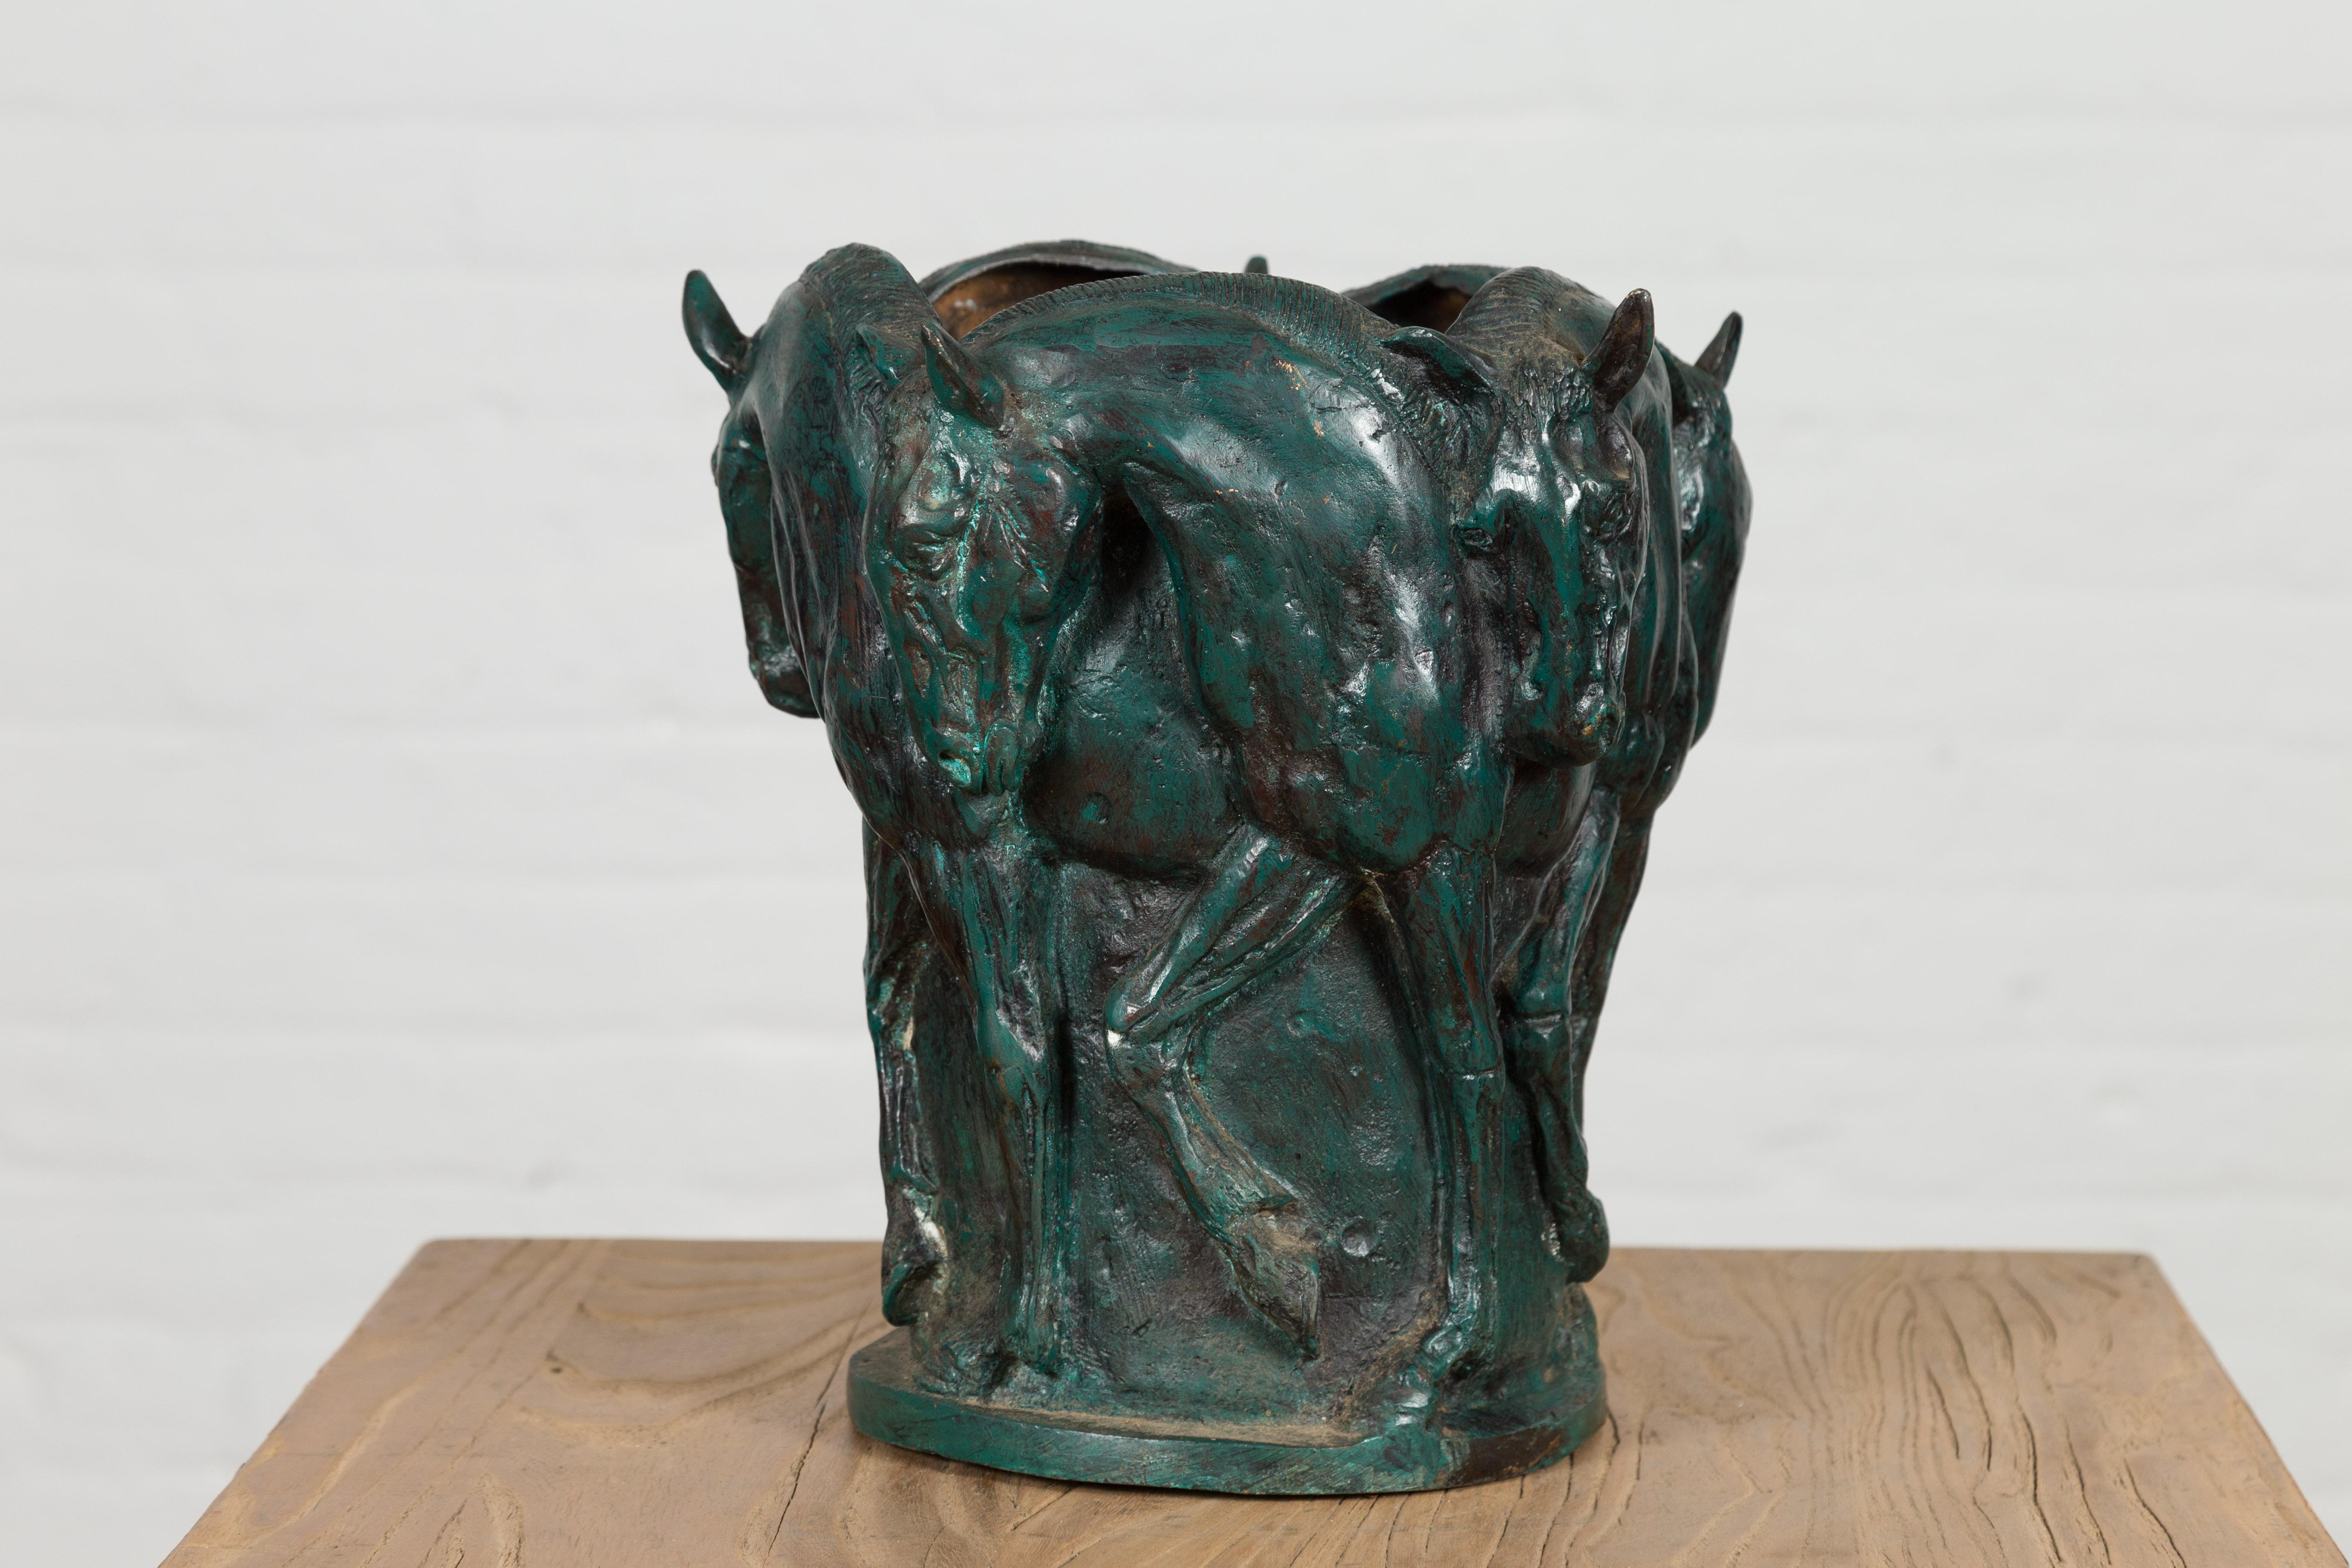 Verdigris Bronze Planter with Frieze of Passing Horses Cast in High Relief  In Good Condition For Sale In Yonkers, NY